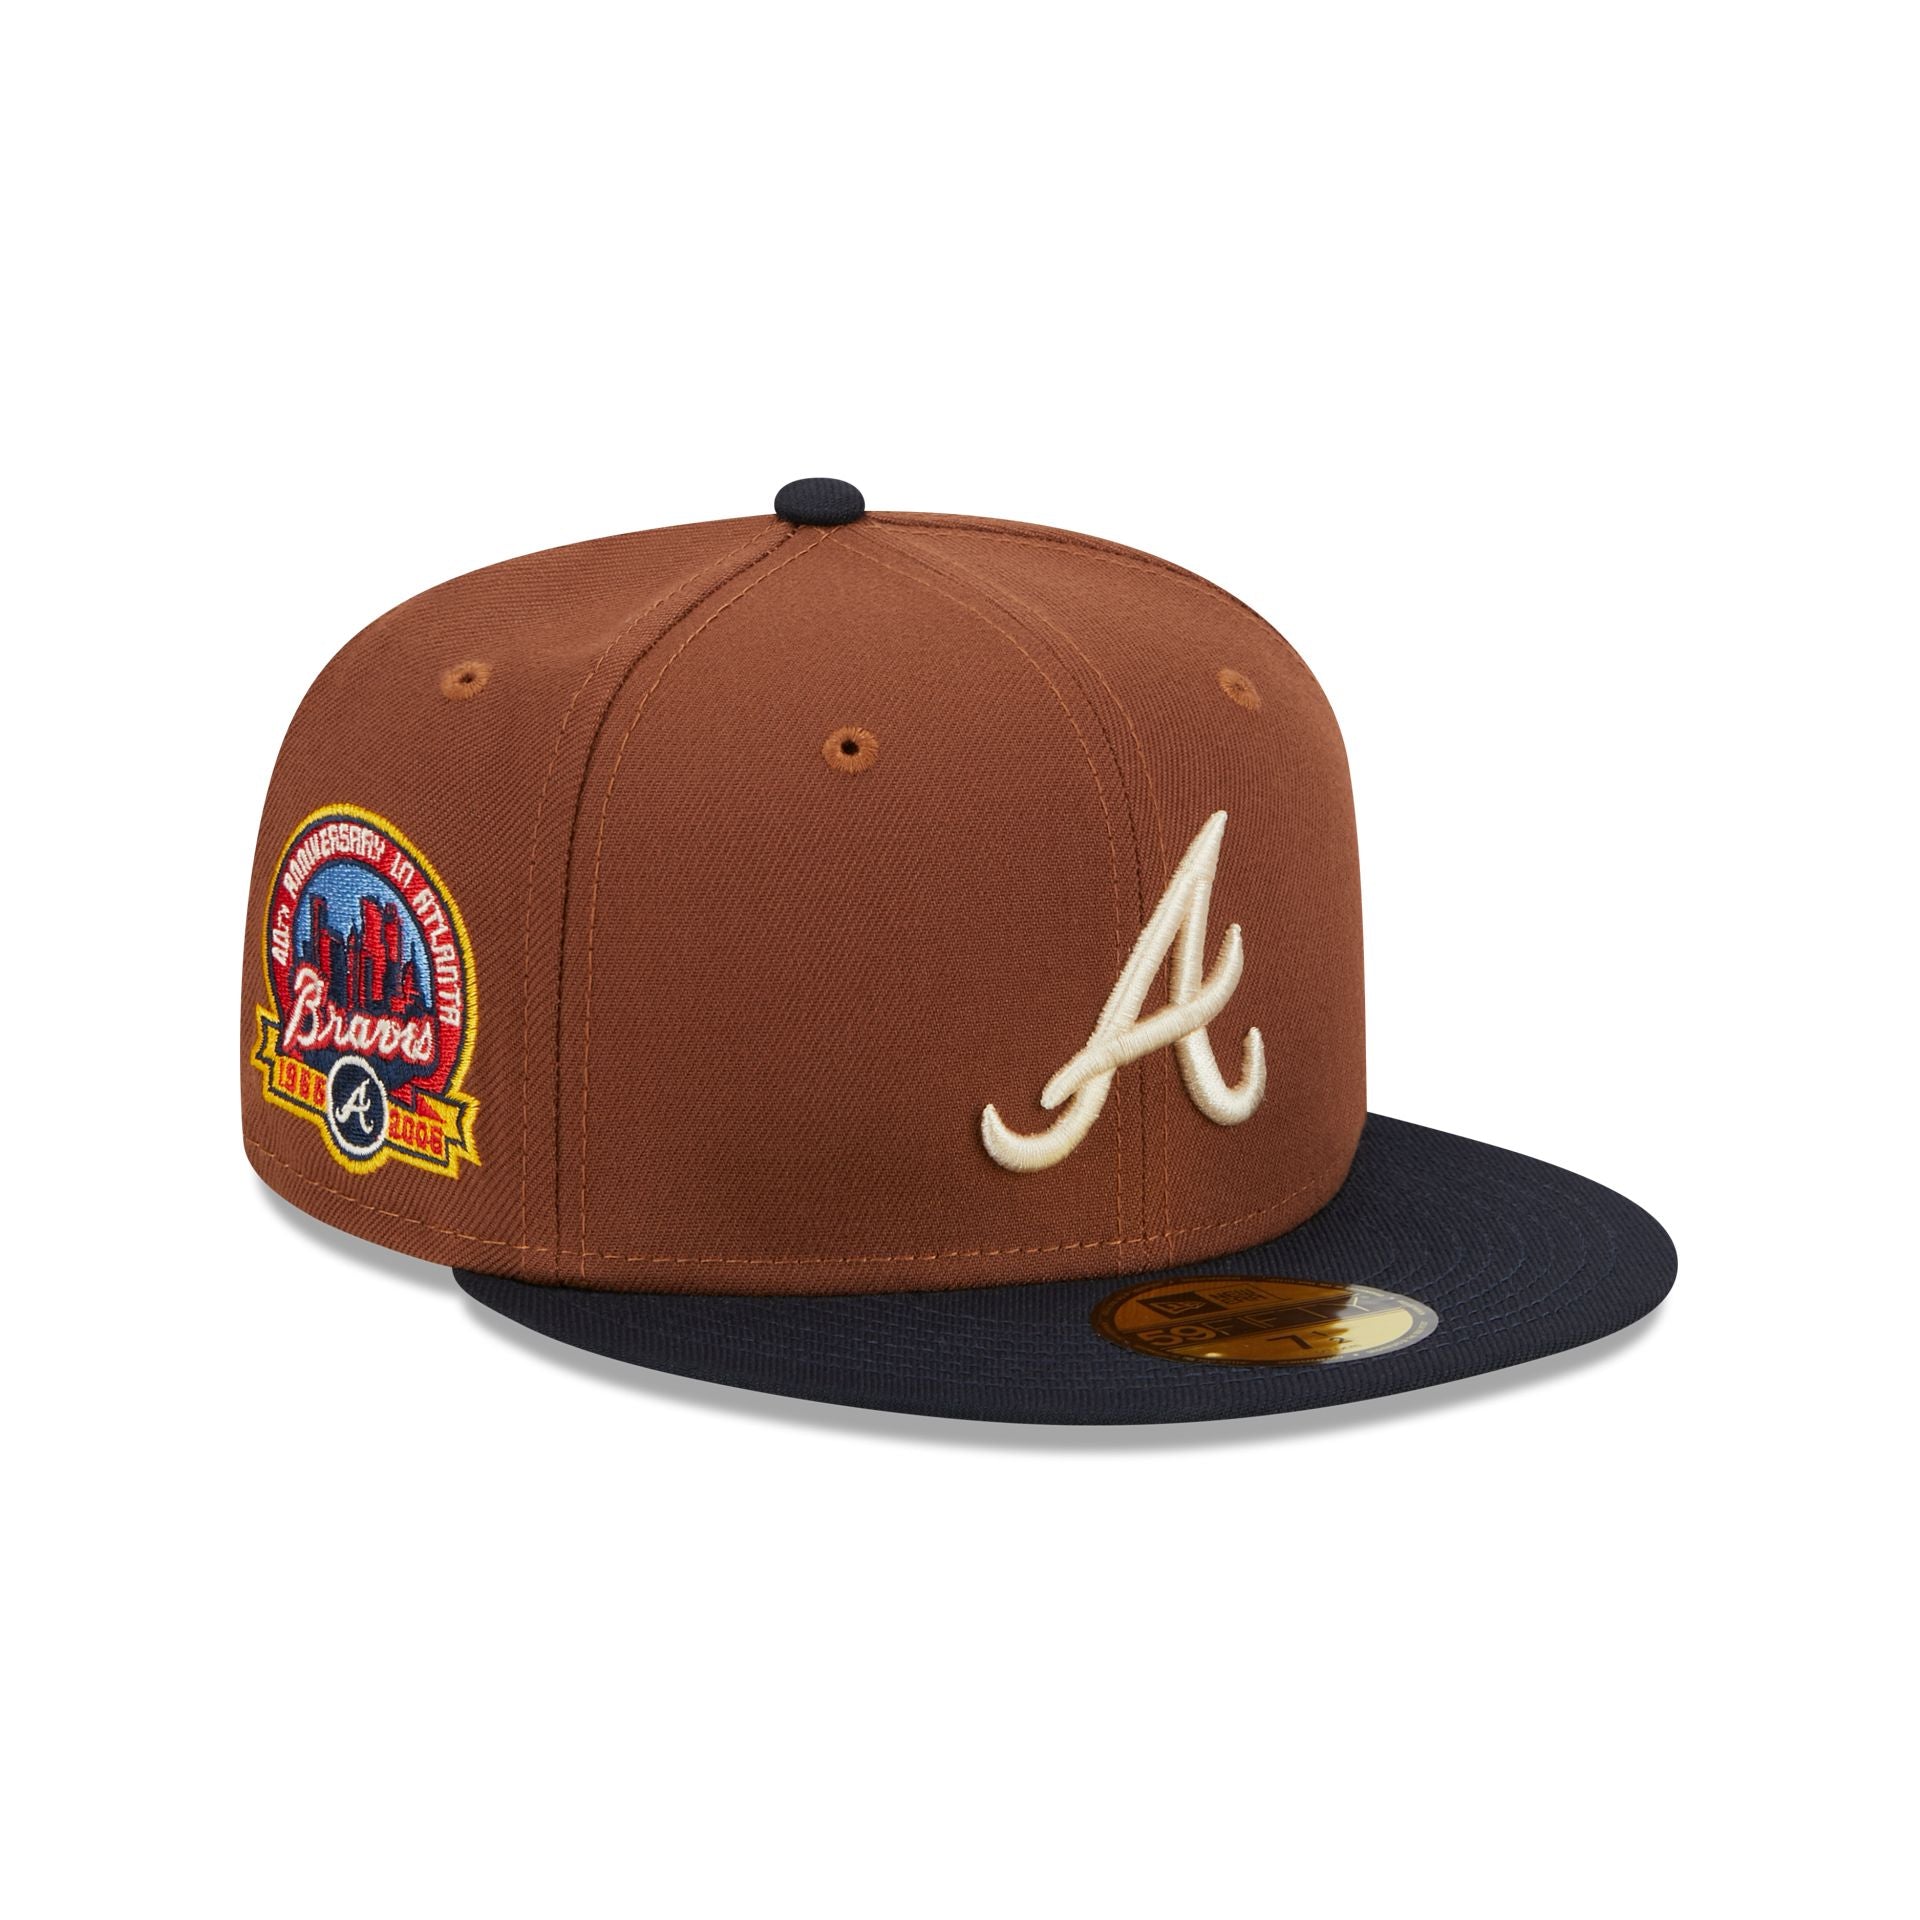 Atlanta Braves Harvest 59FIFTY Fitted Hat, Brown - Size: 8, MLB by New Era